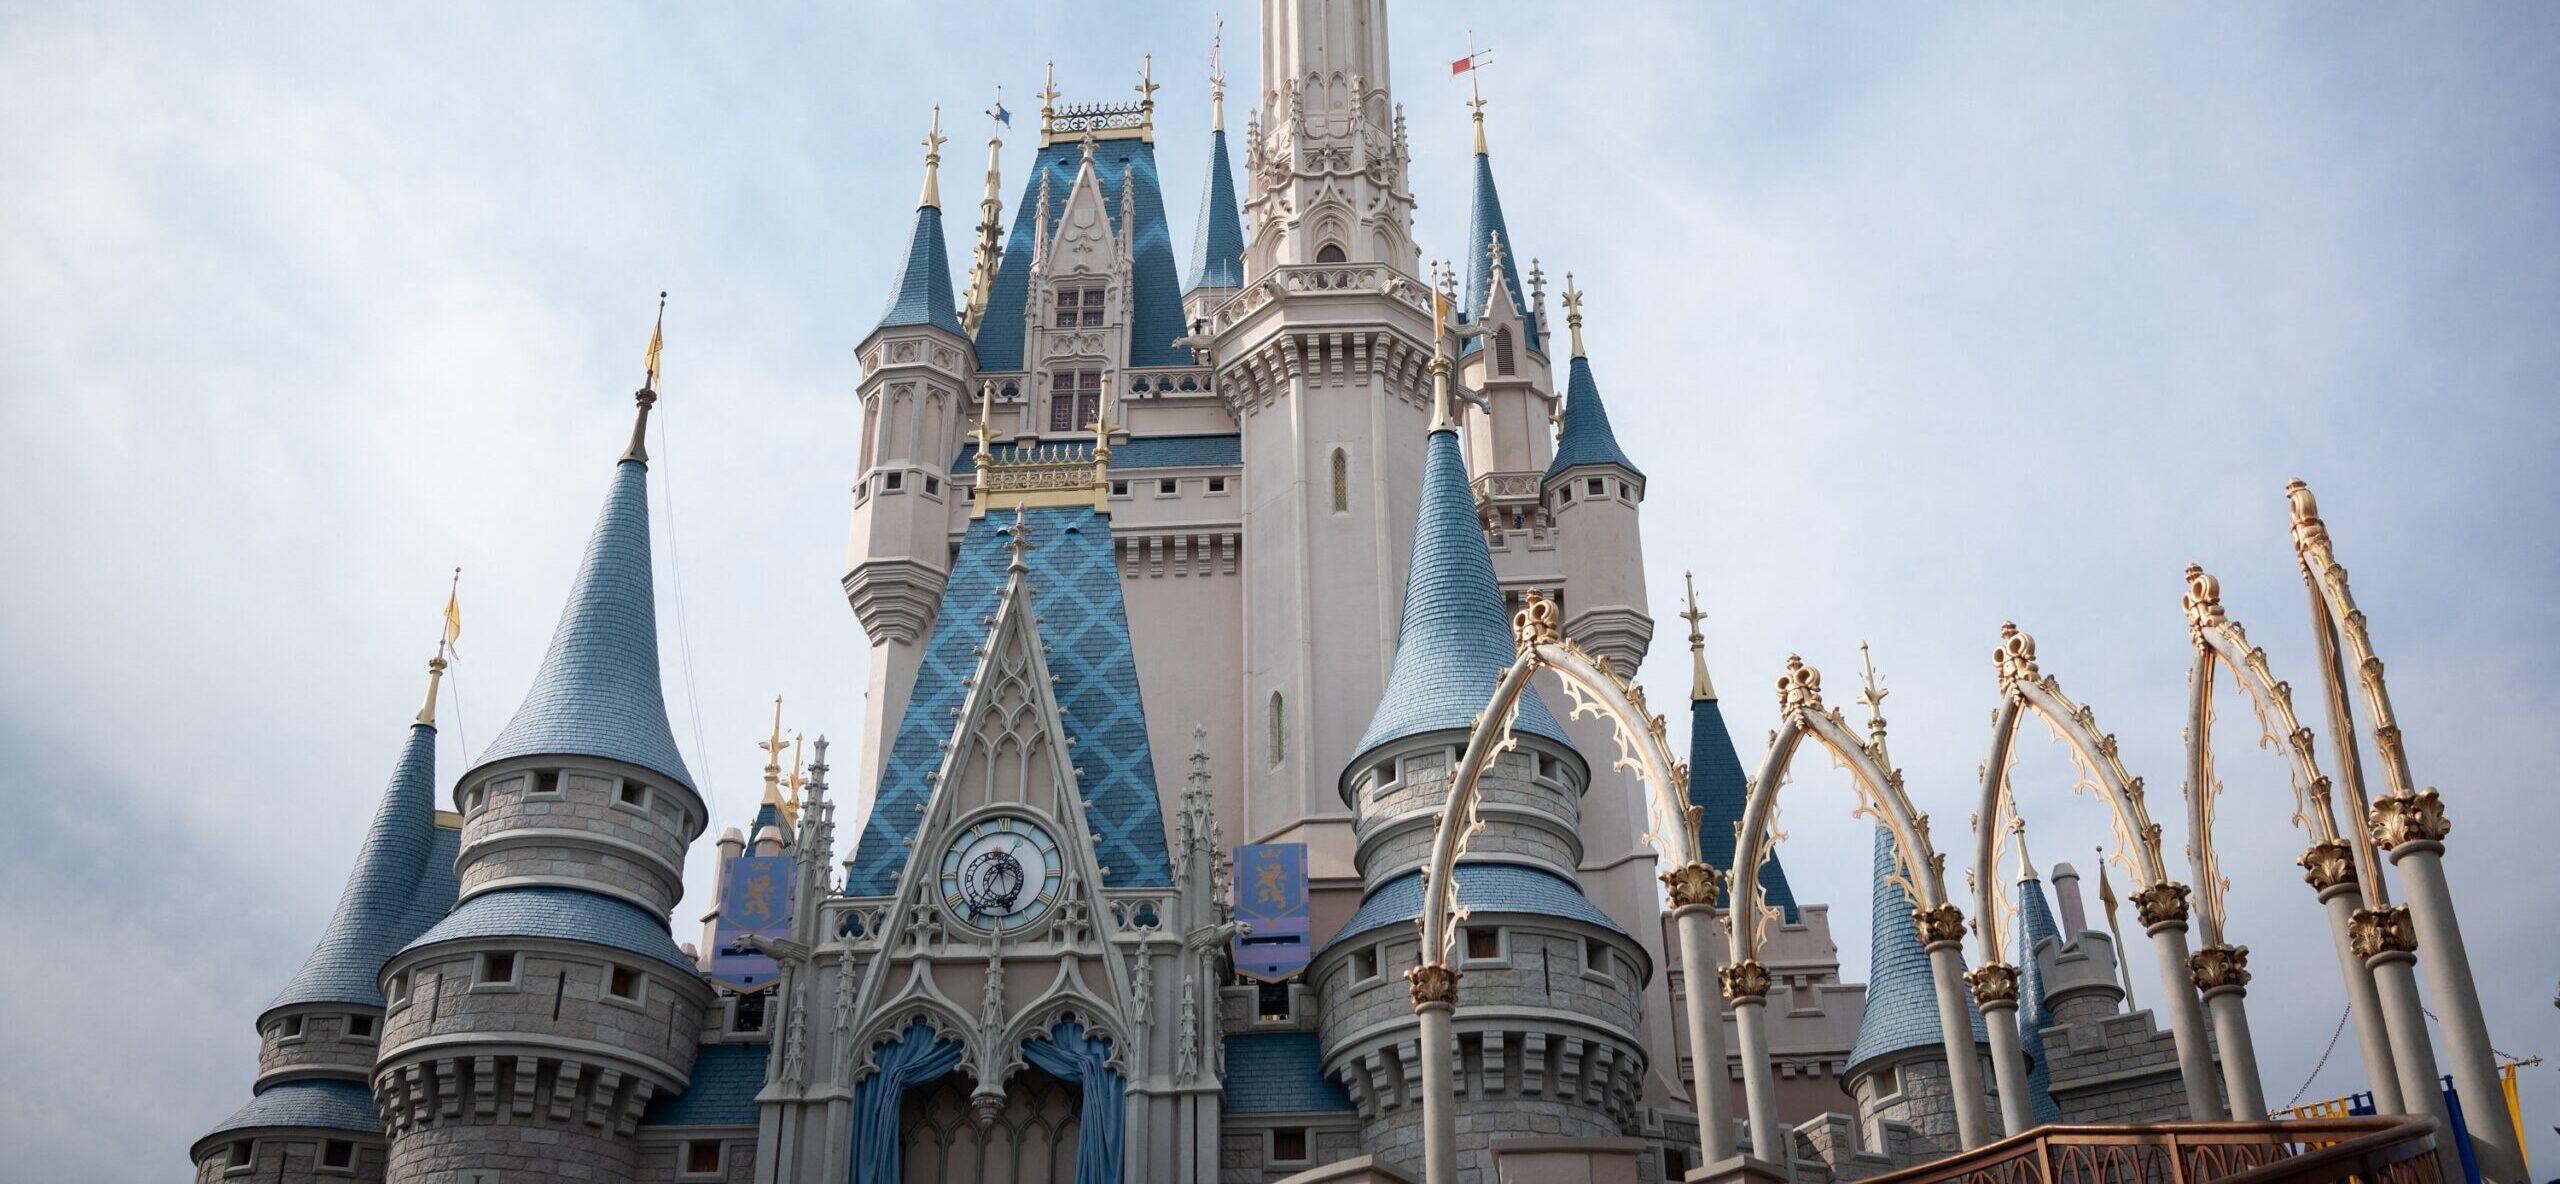 Video Shows Smoke Emulate From Cinderella Castle At Disney World